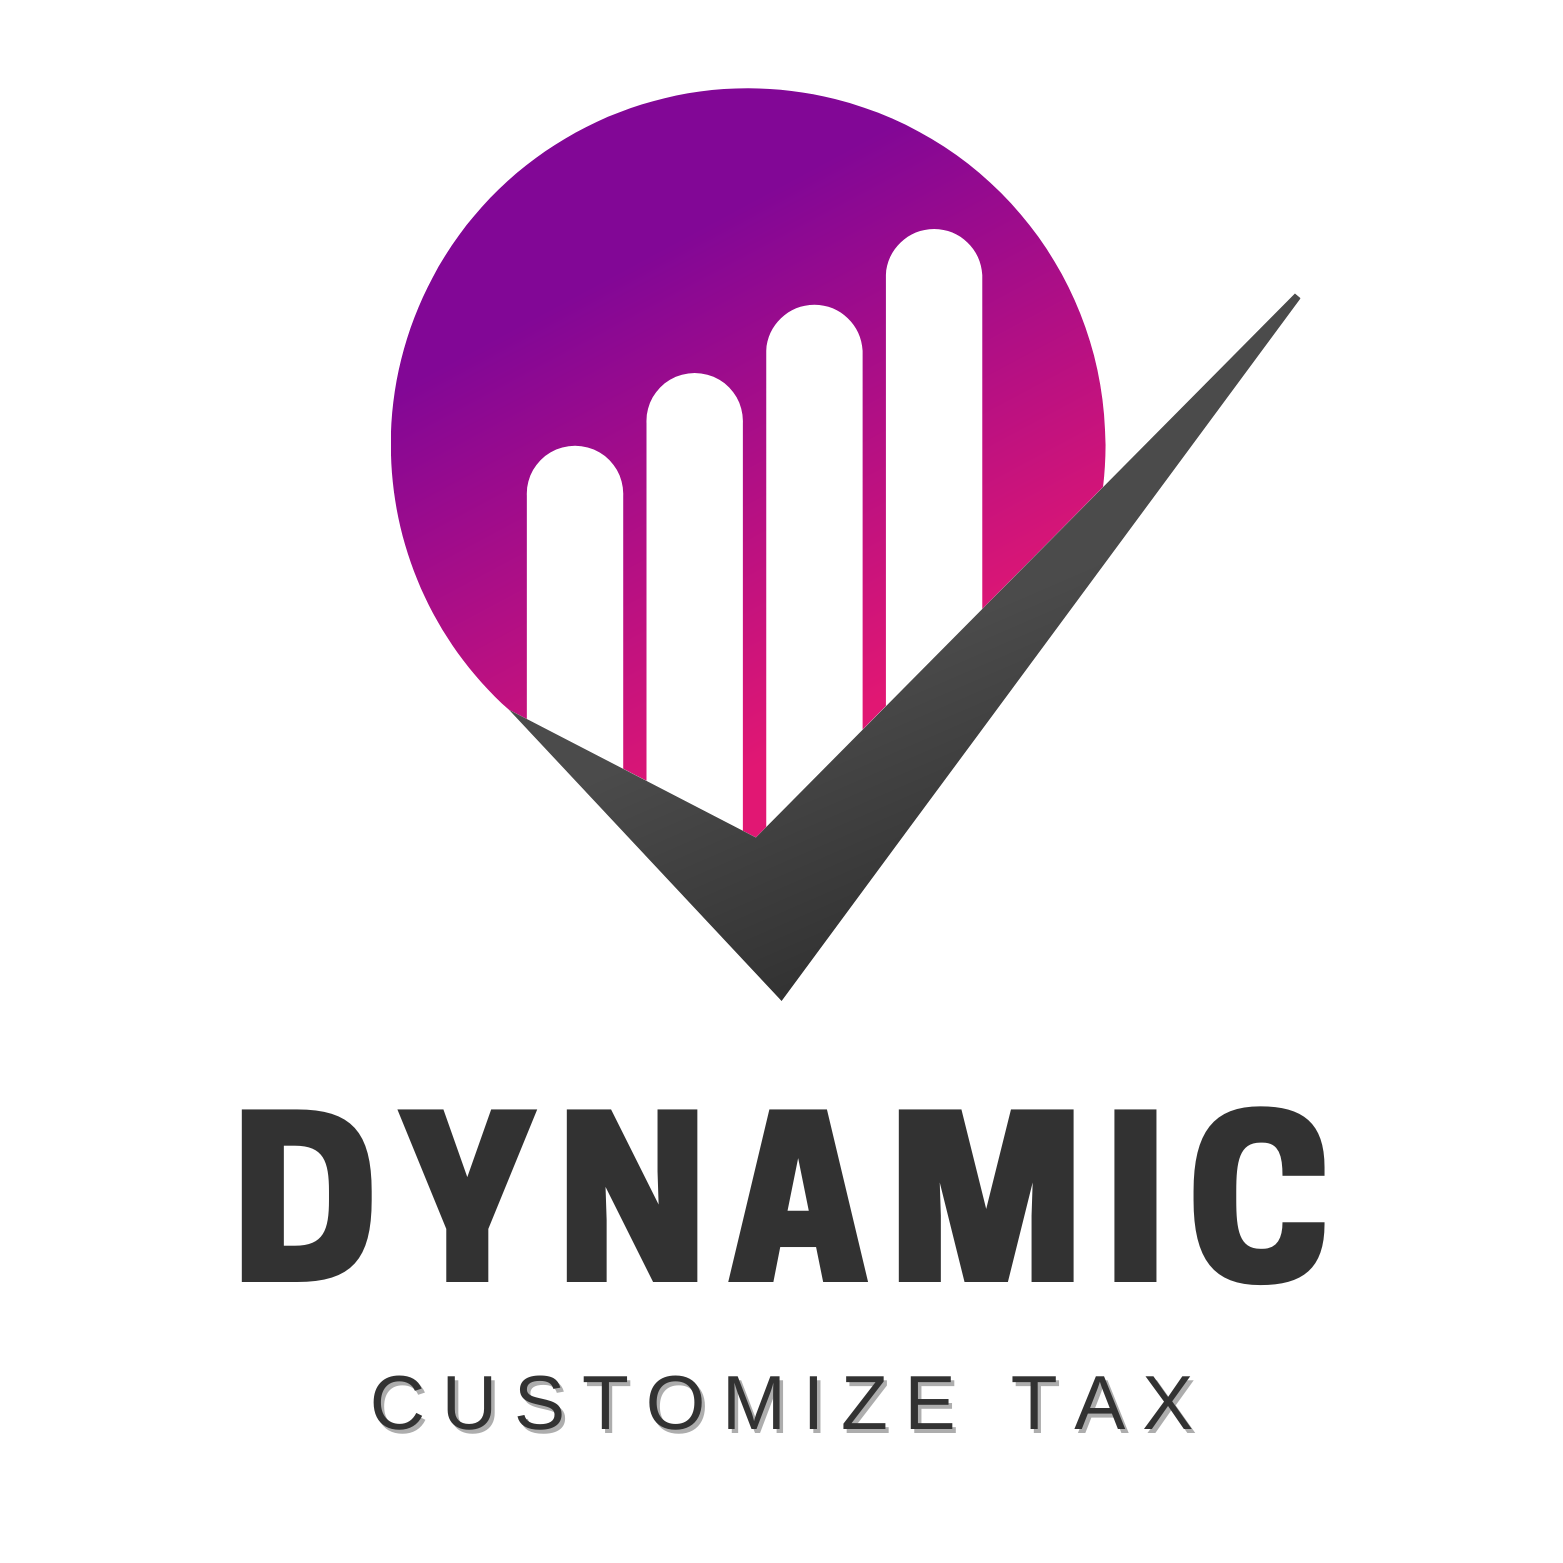 a logo for dynamic customize tax with a purple heart and a check mark .  | Dallas, TX | Dynamic Customize Tax